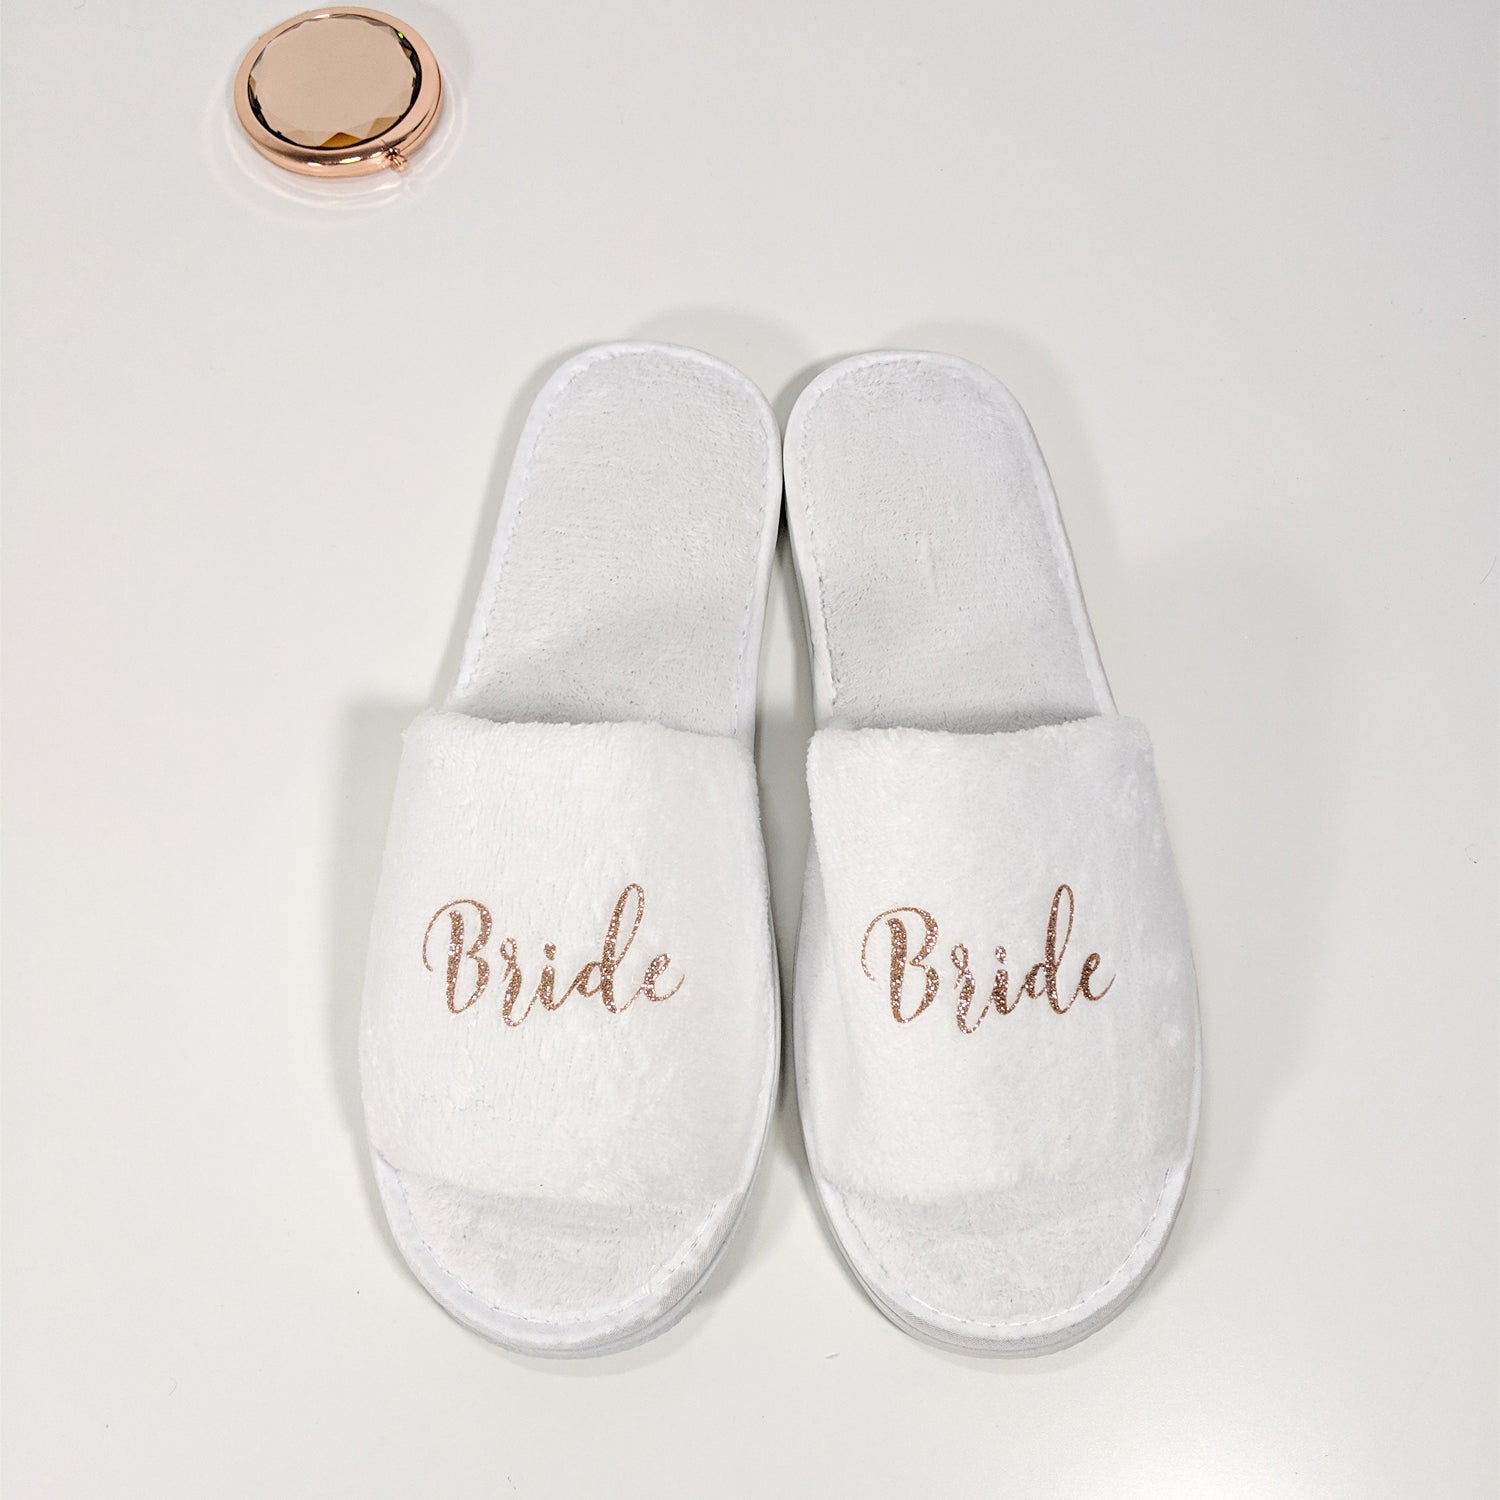 Personalised Bride and Bridesmaid Slippers - White & Glitter Rose Gold ...